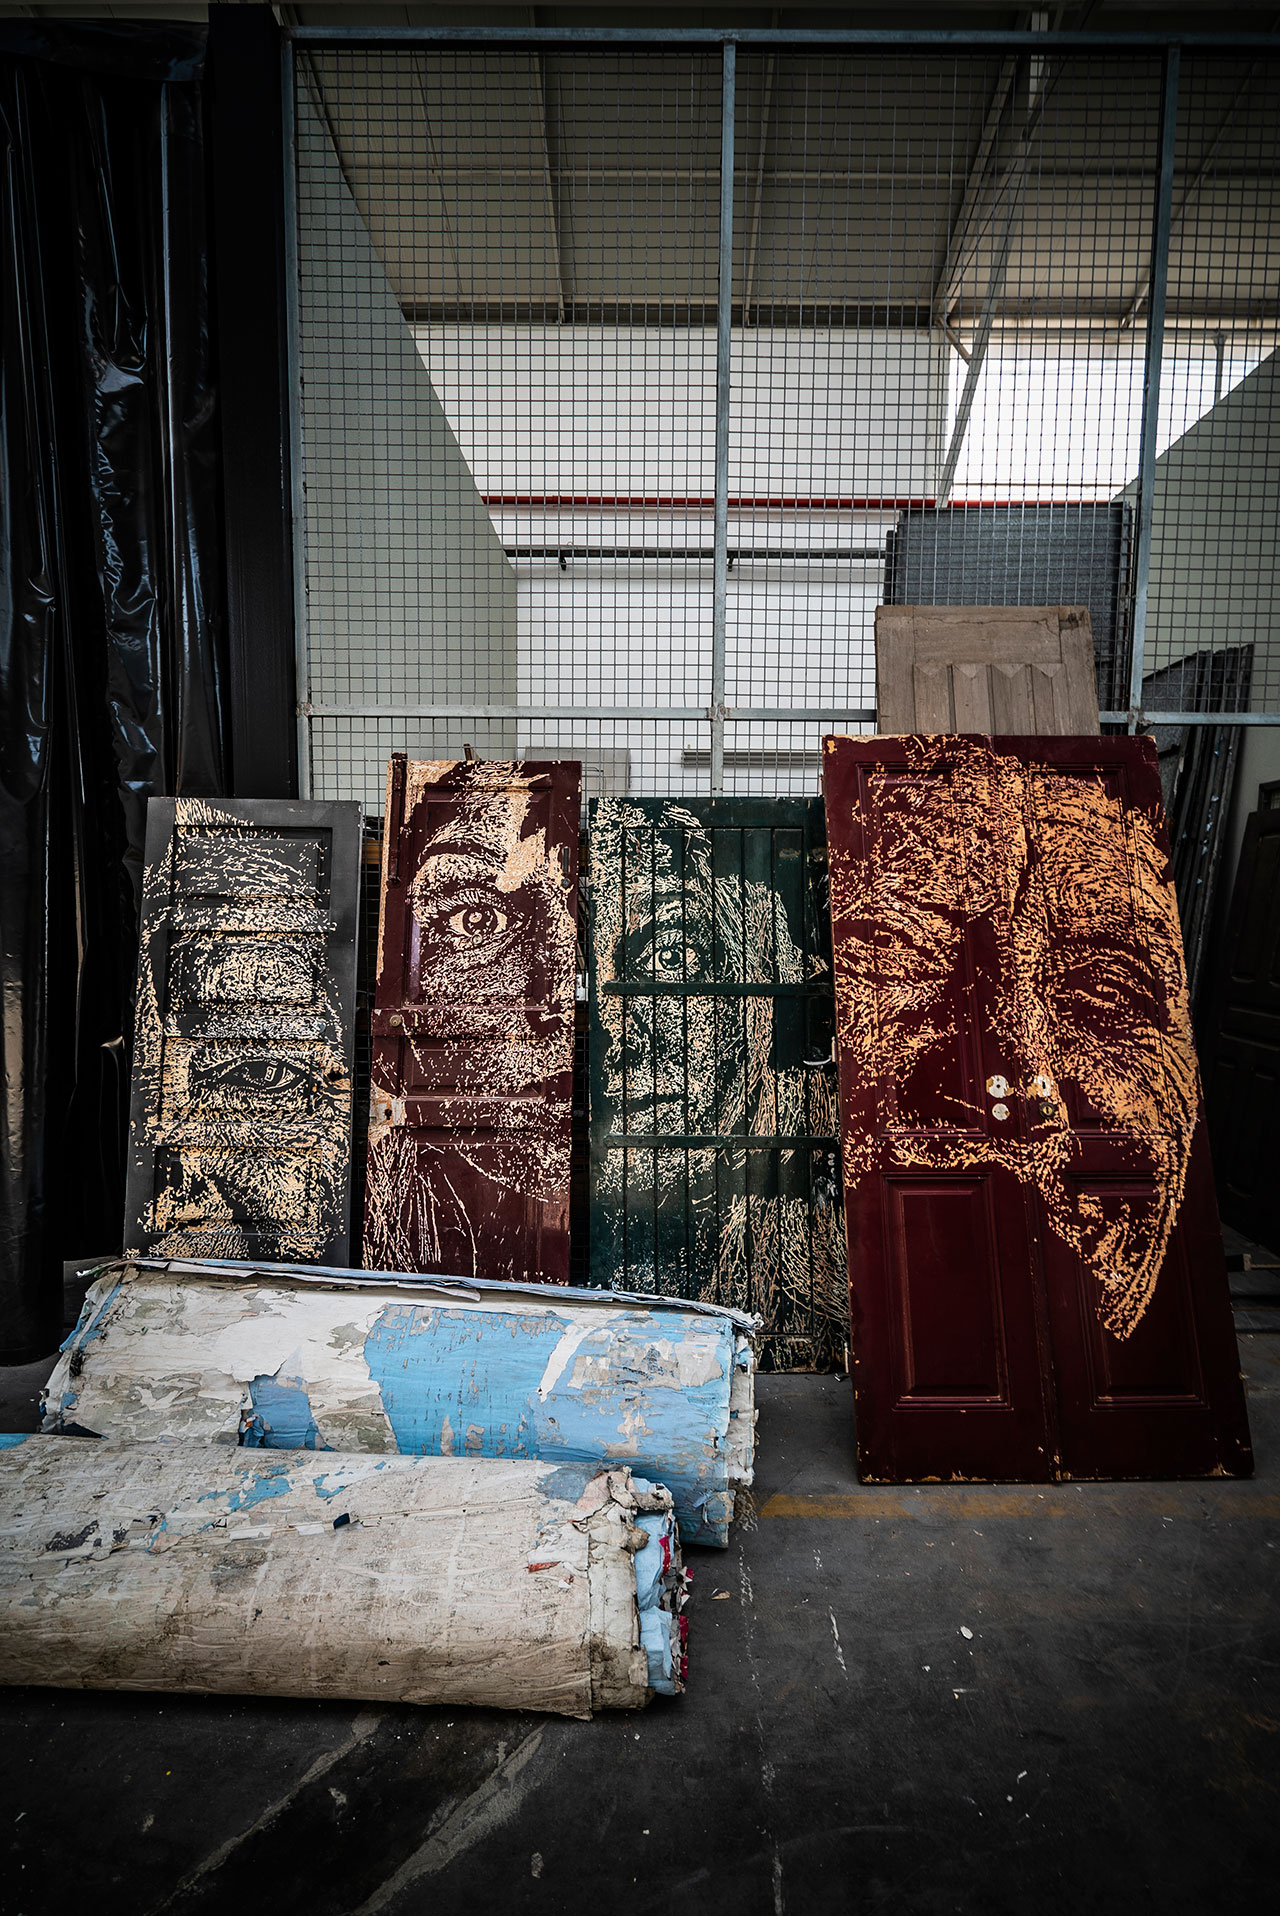 VHILS, Fragments Urbains making of. Photo by Jose Pando Lucas.